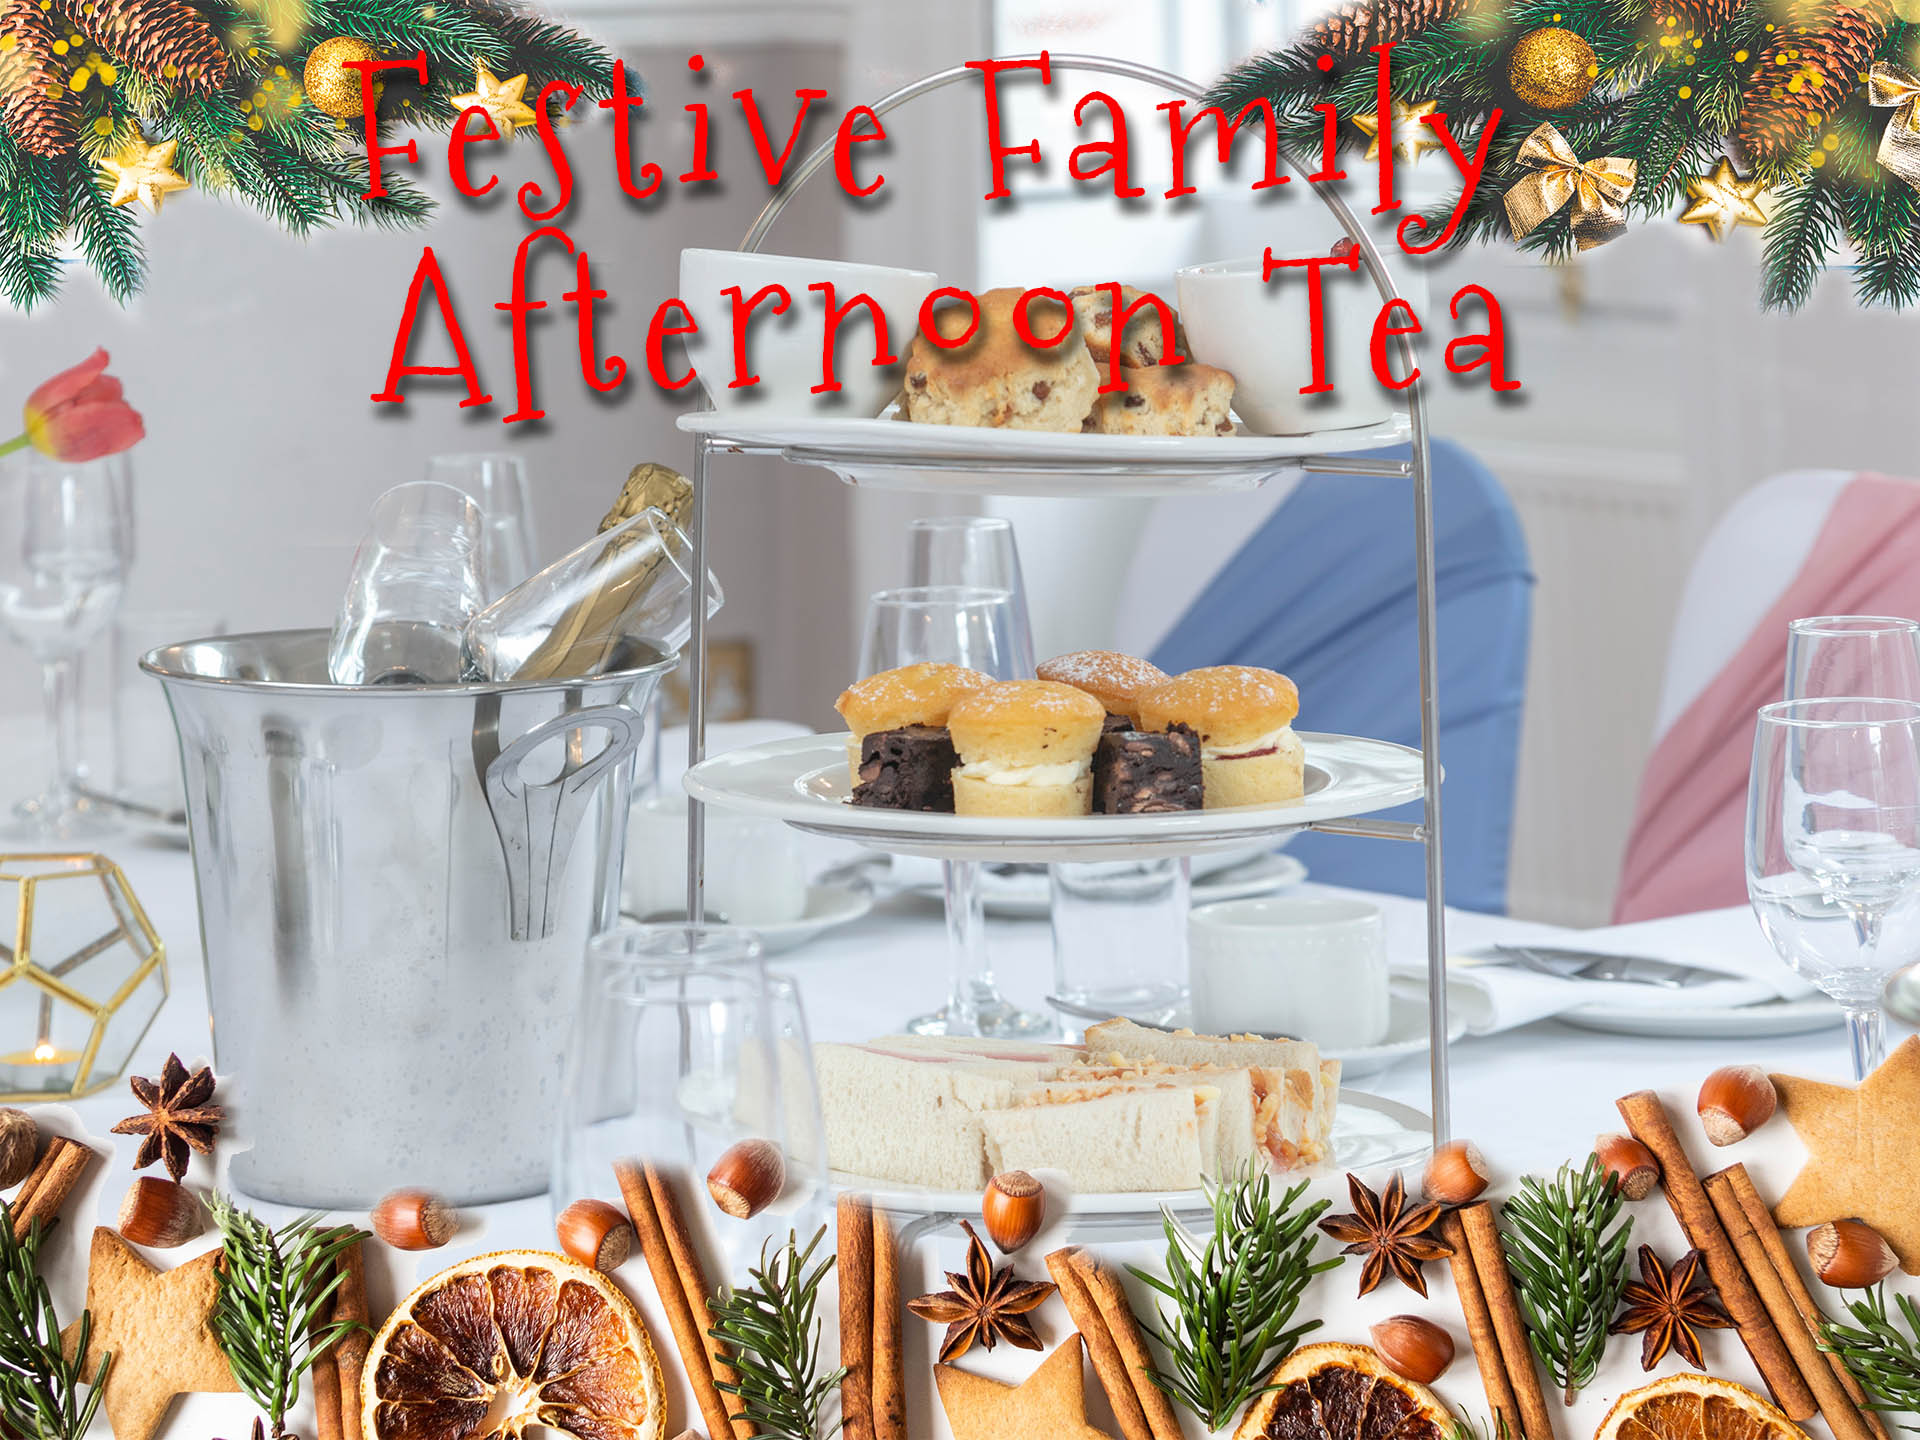 Festive Afternoon Tea at The Old Rectory Handsworth Sheffield